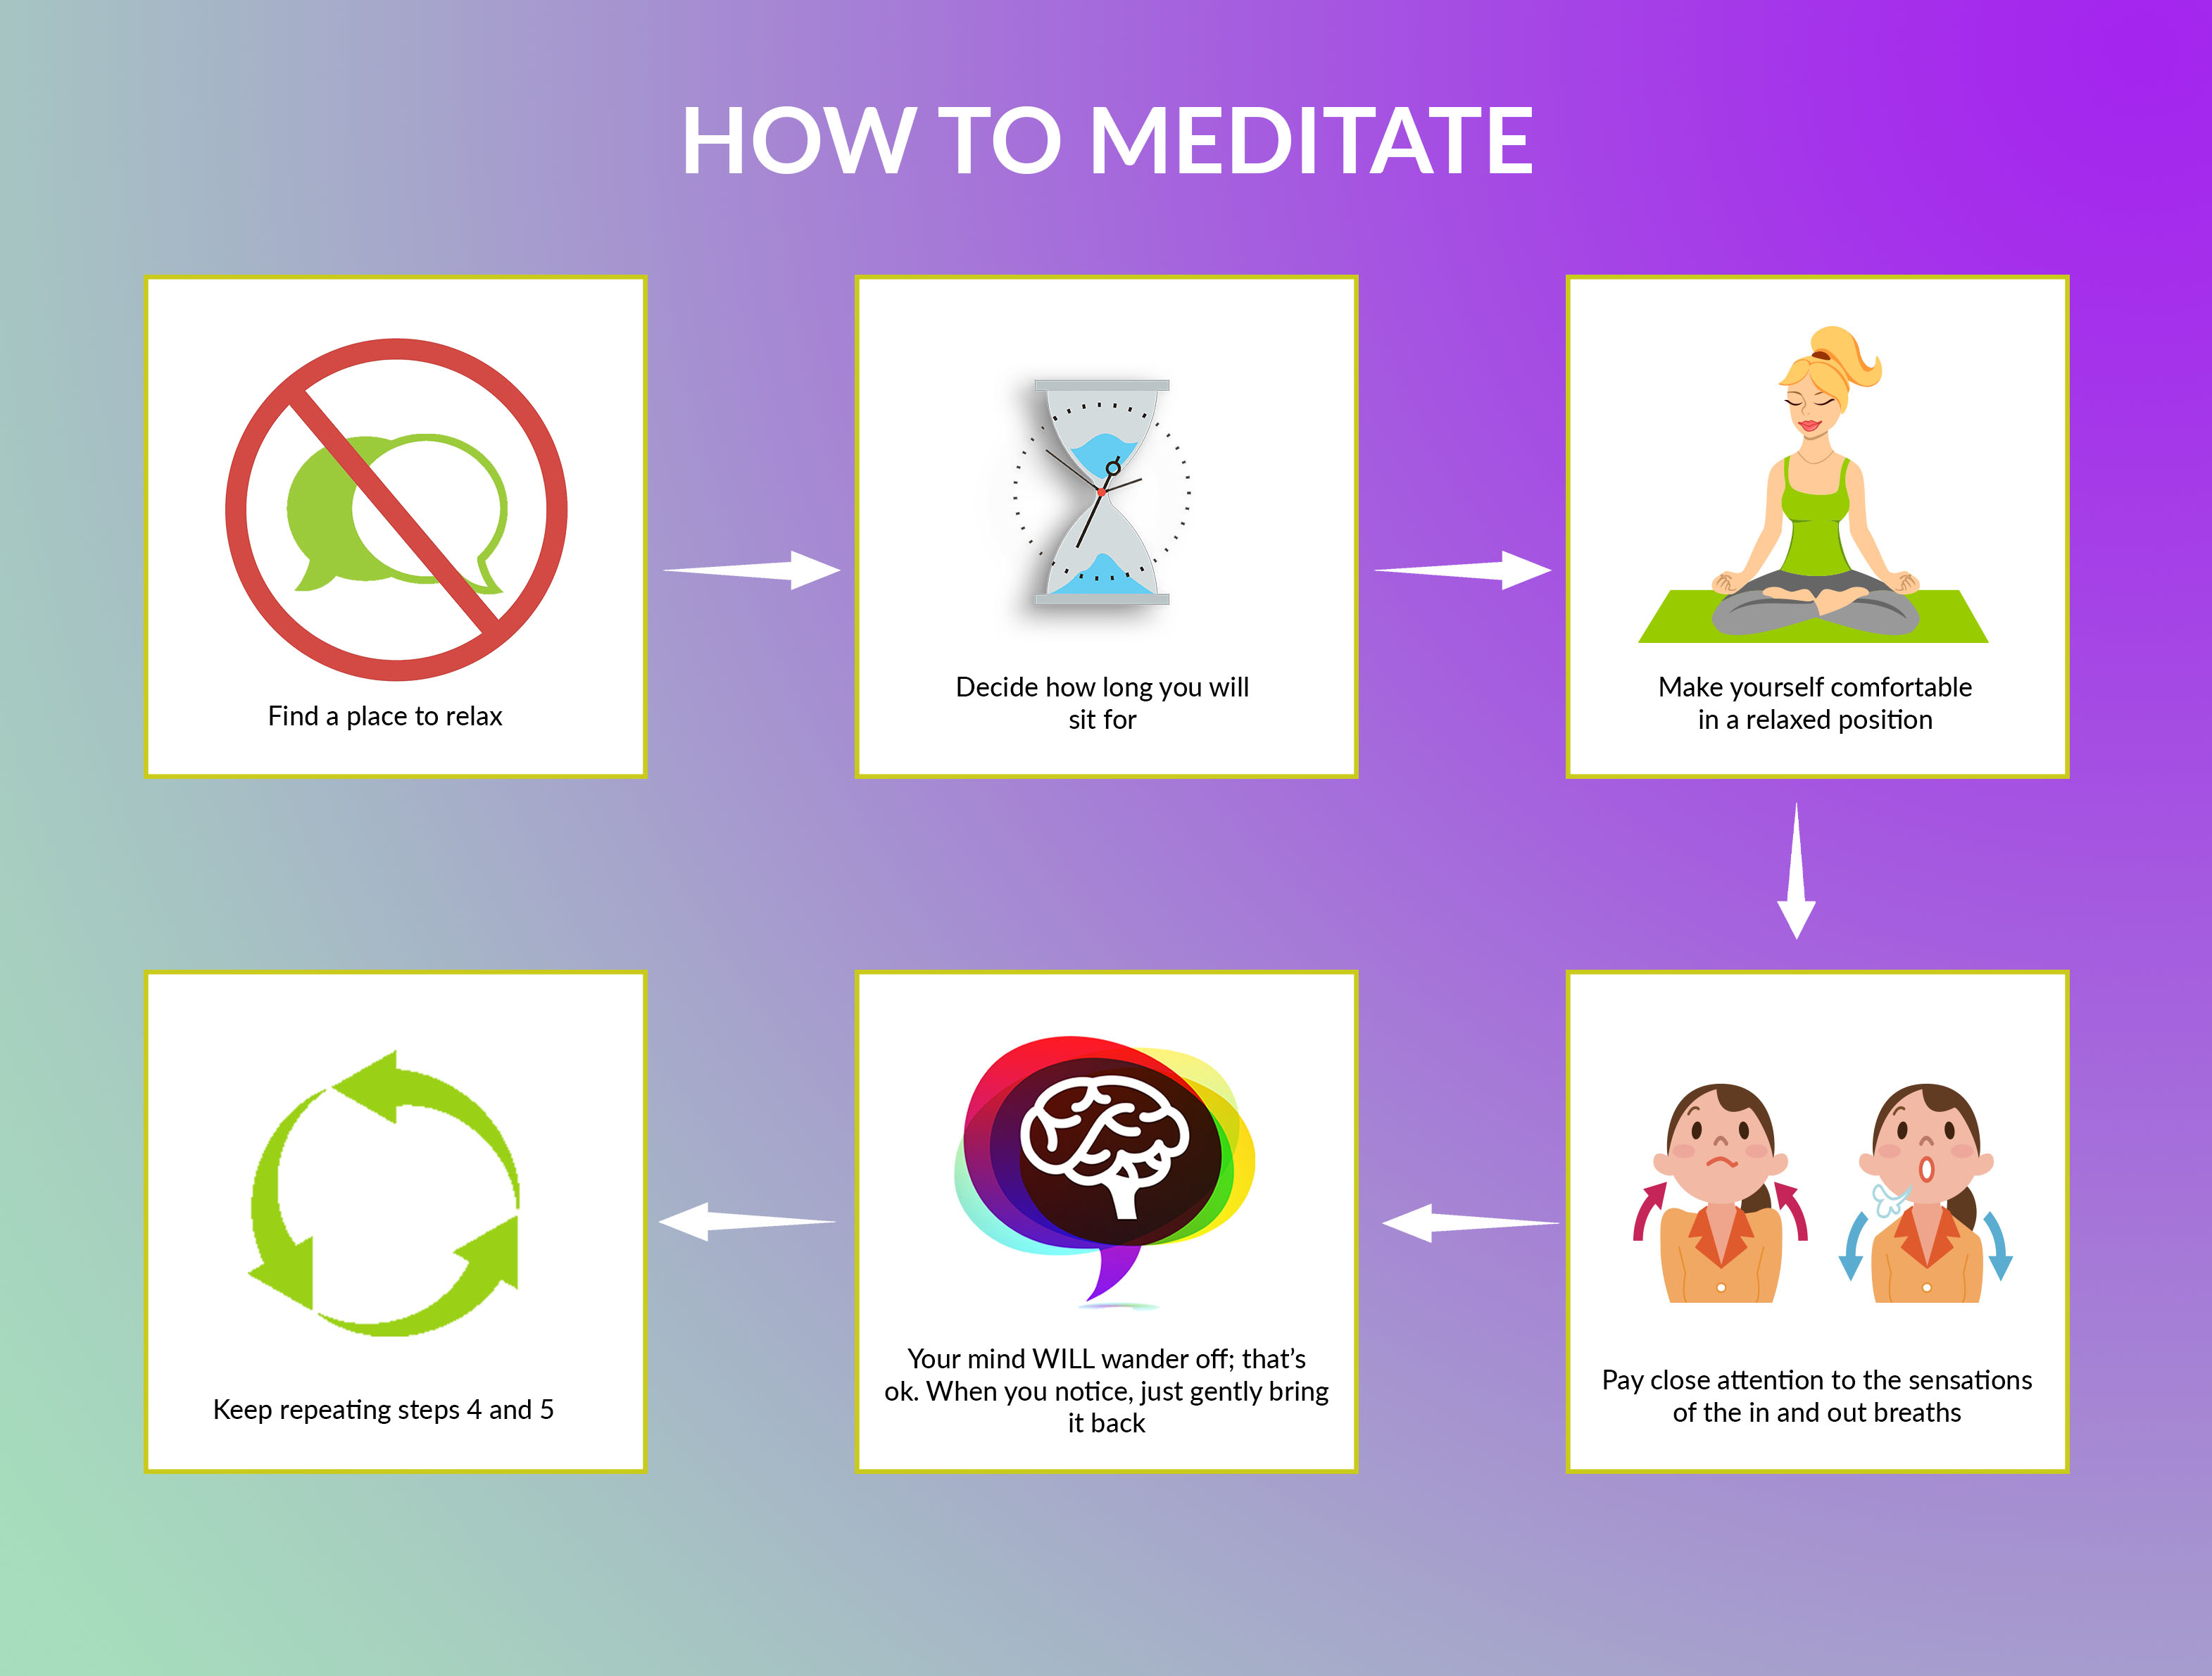 Instructions on the practise of meditation